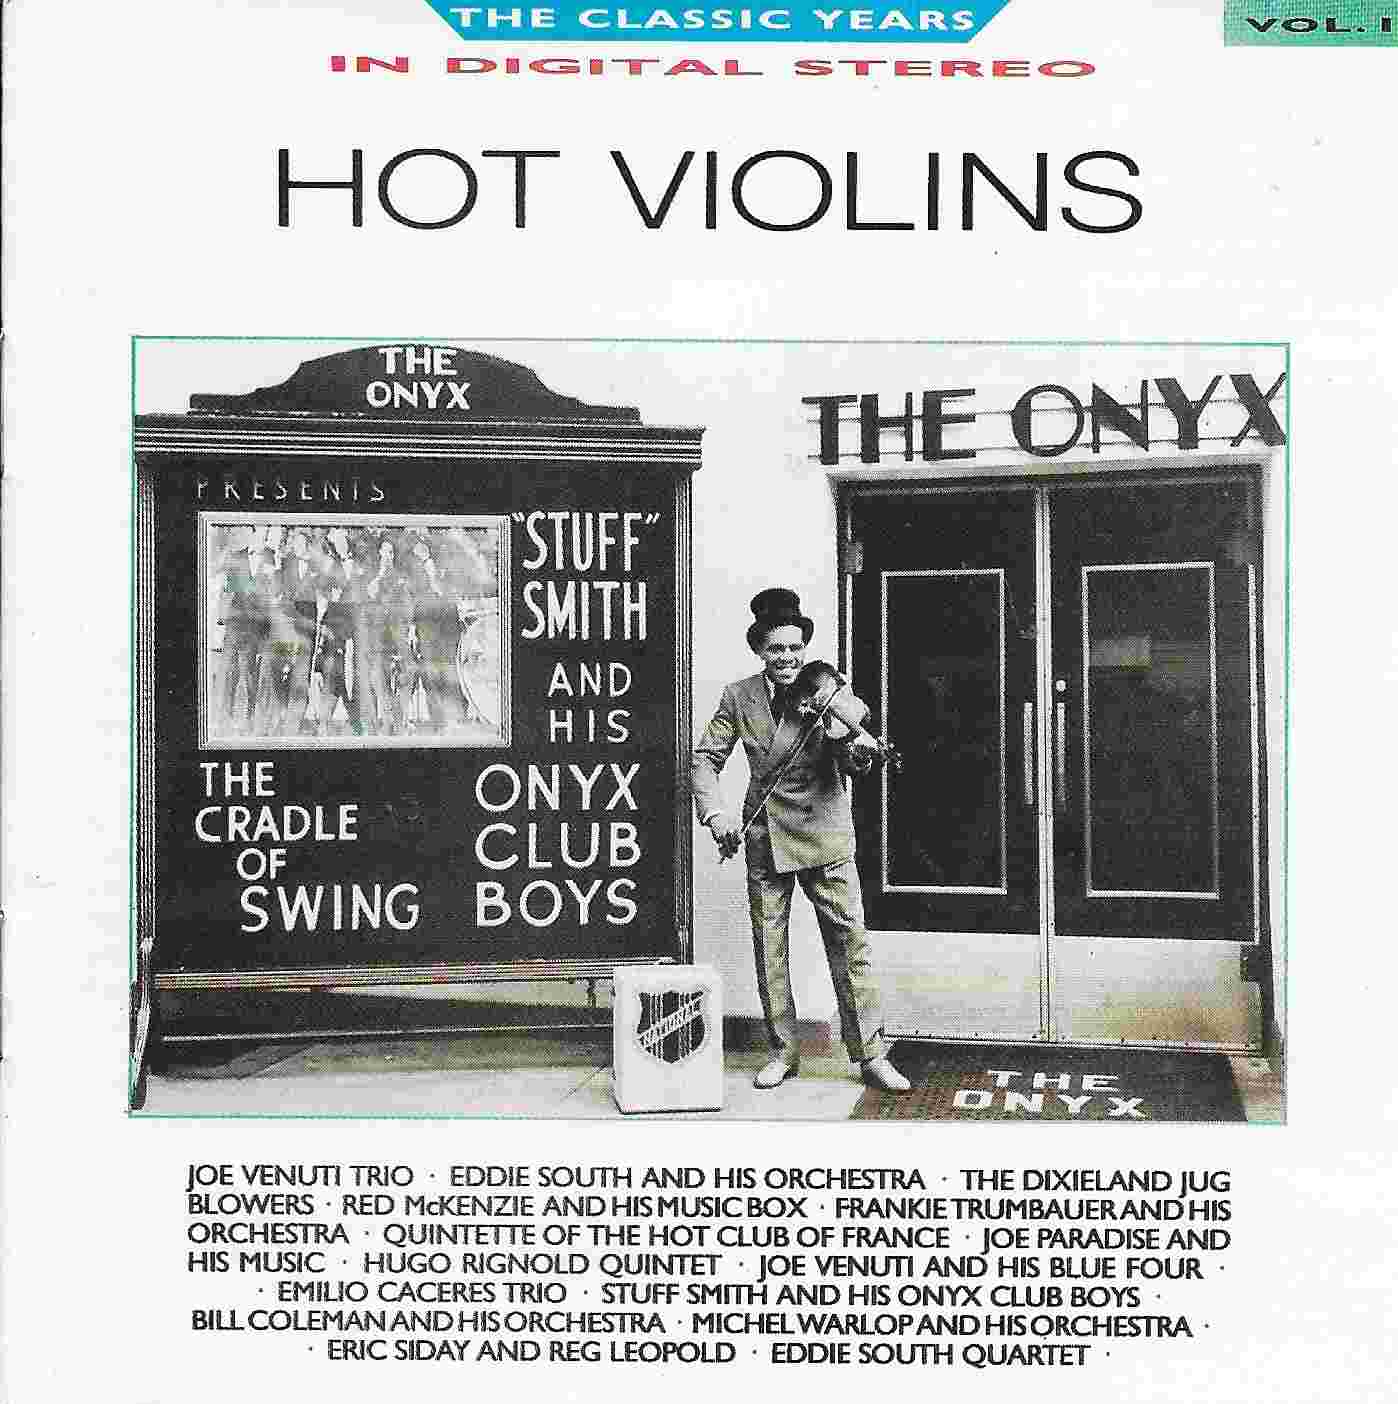 Picture of BBCCD680 Classic years - Volume 11, Hot violins by artist Various from the BBC cds - Records and Tapes library